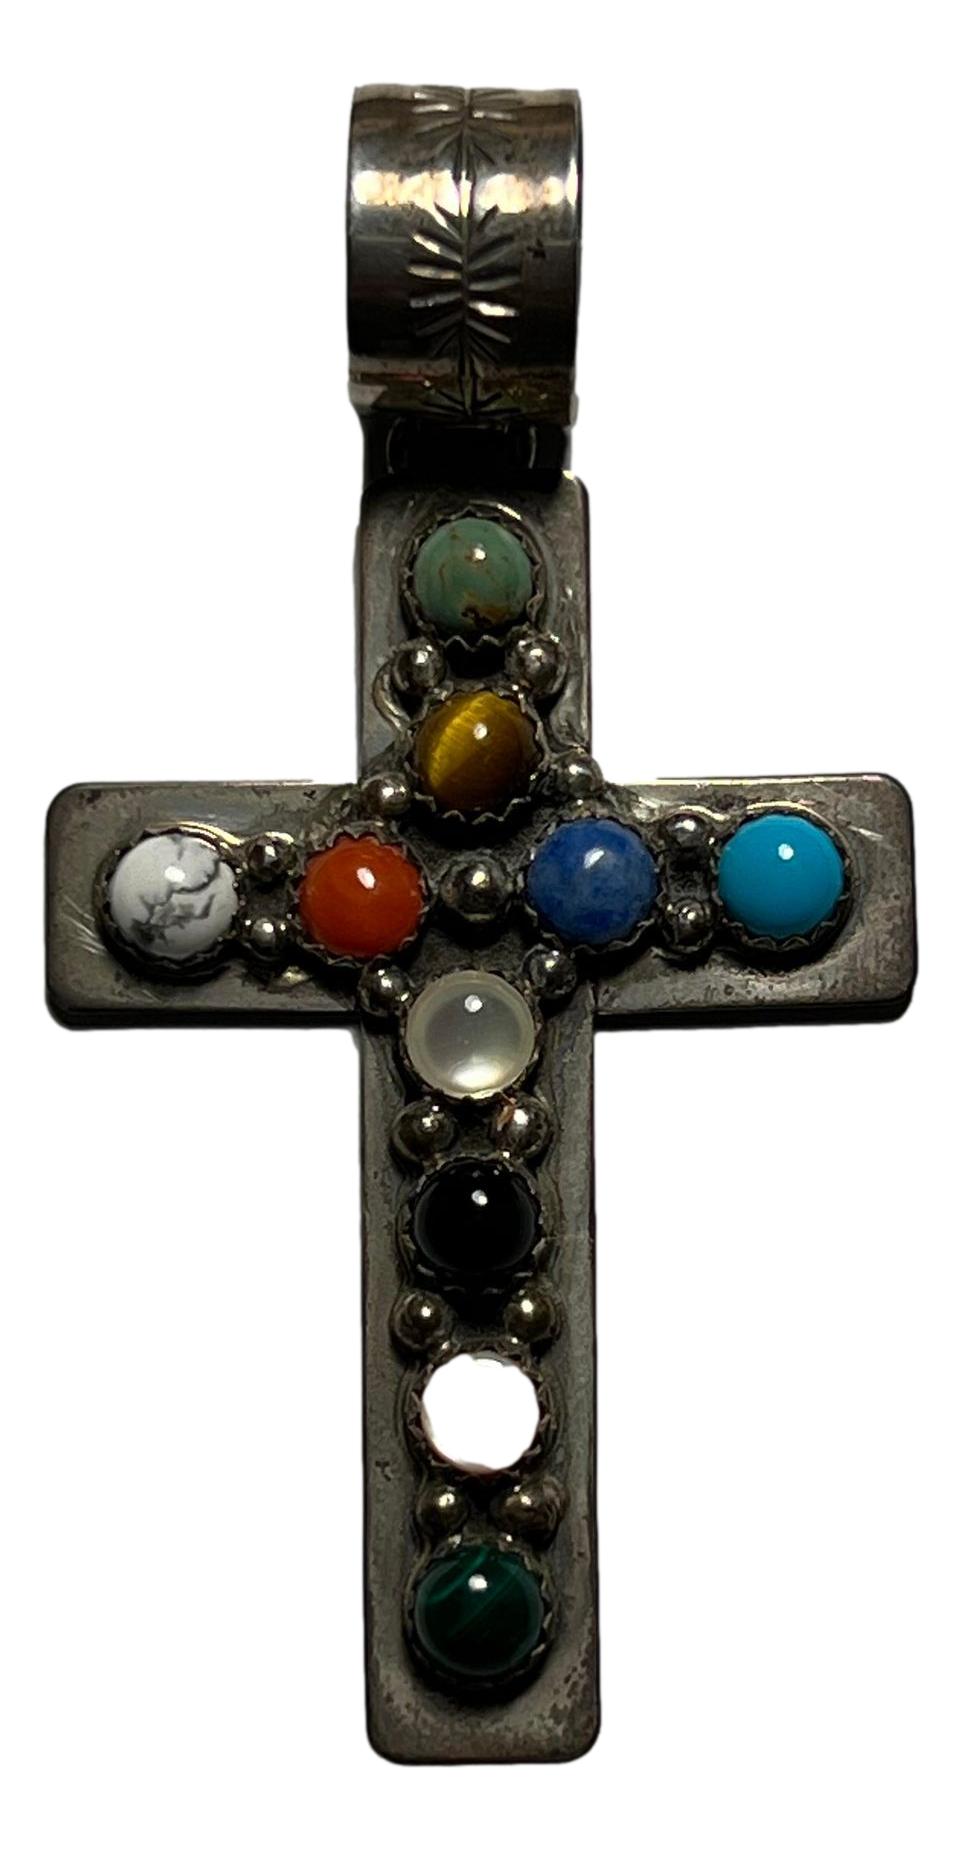 Pendant Cross Sterling Silver Handcrafted Skilled Native American Artisans 2 H Inch 10 Multi Semi Precious Stones Setting - Ysleta Mission Gift Shop- VOTED El Paso's Best Gift Shop